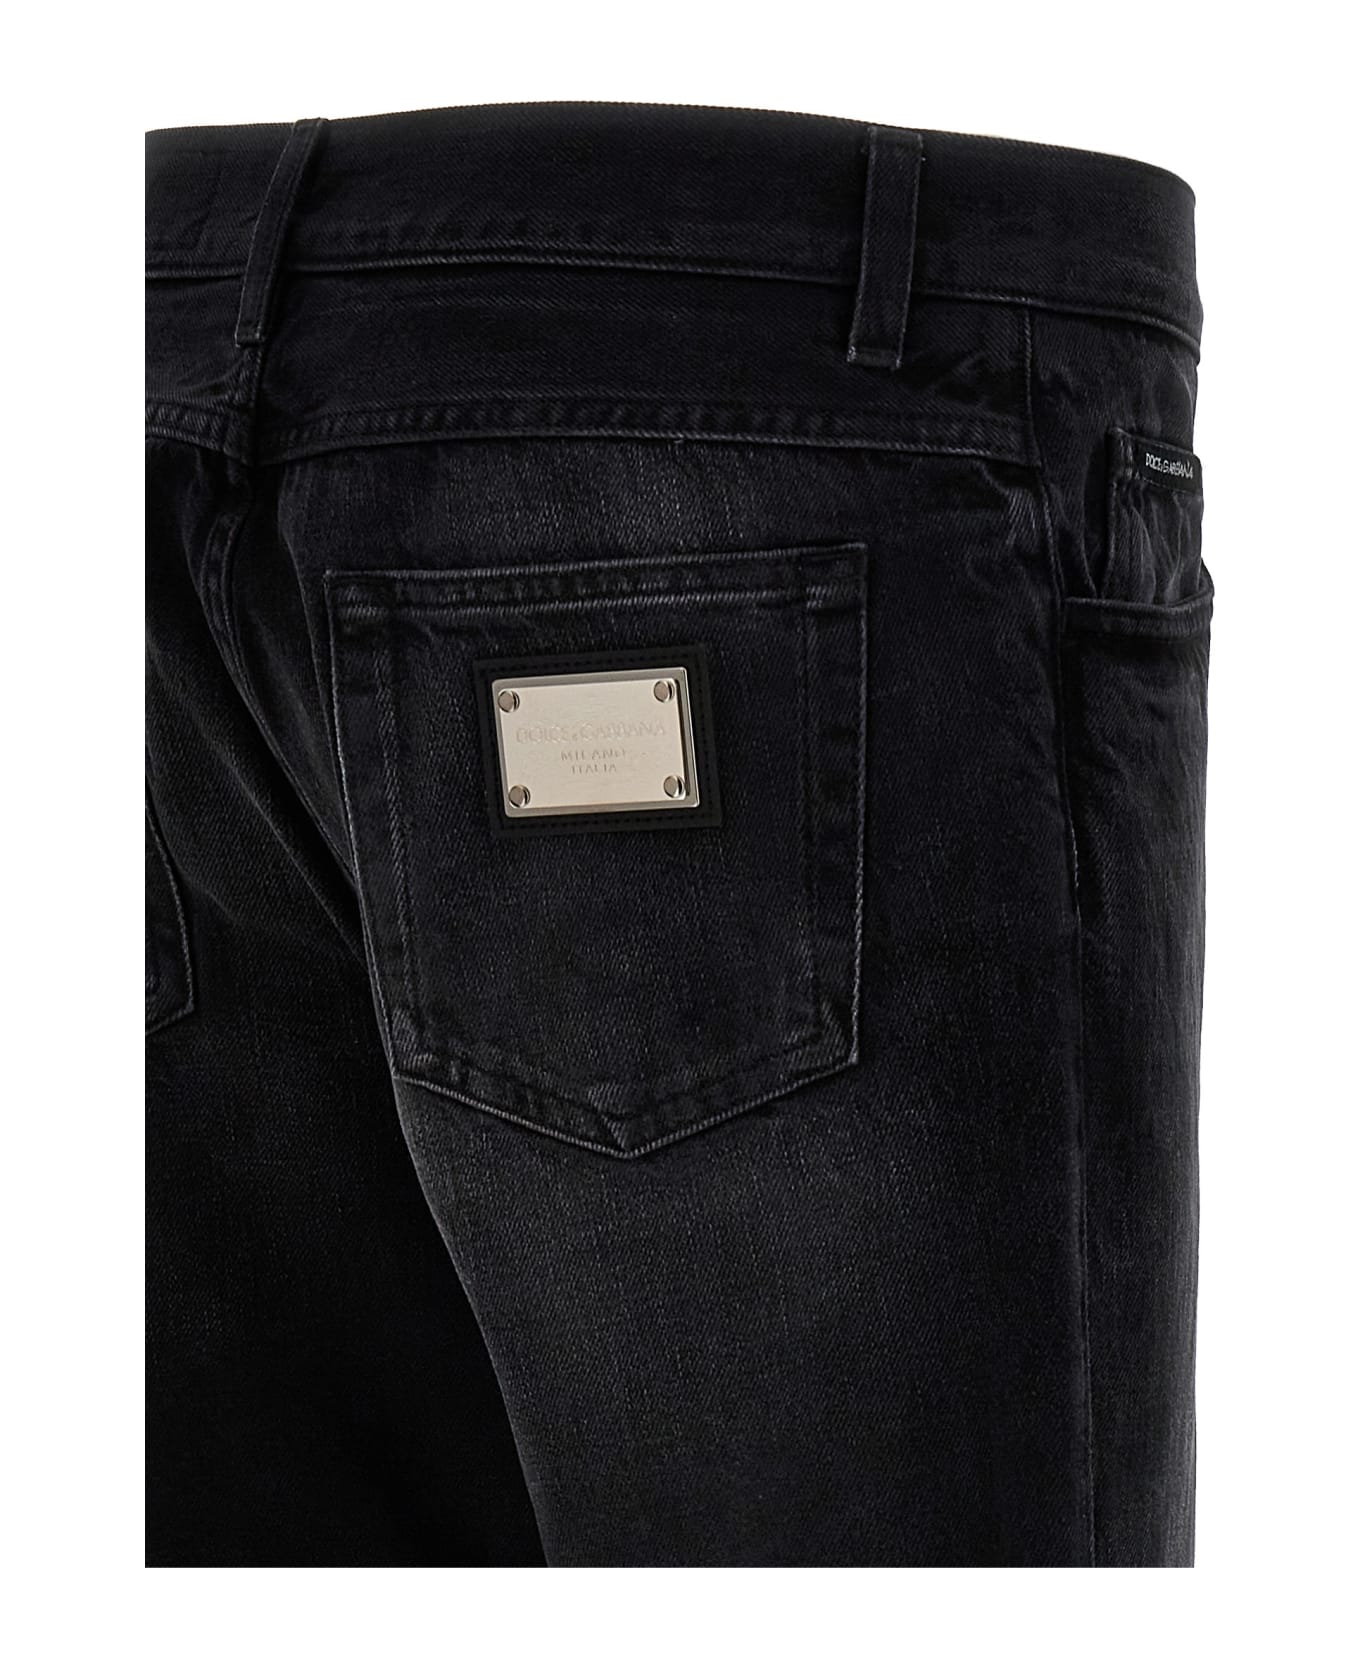 Dolce with & Gabbana Logo Plaque Jeans - Black  